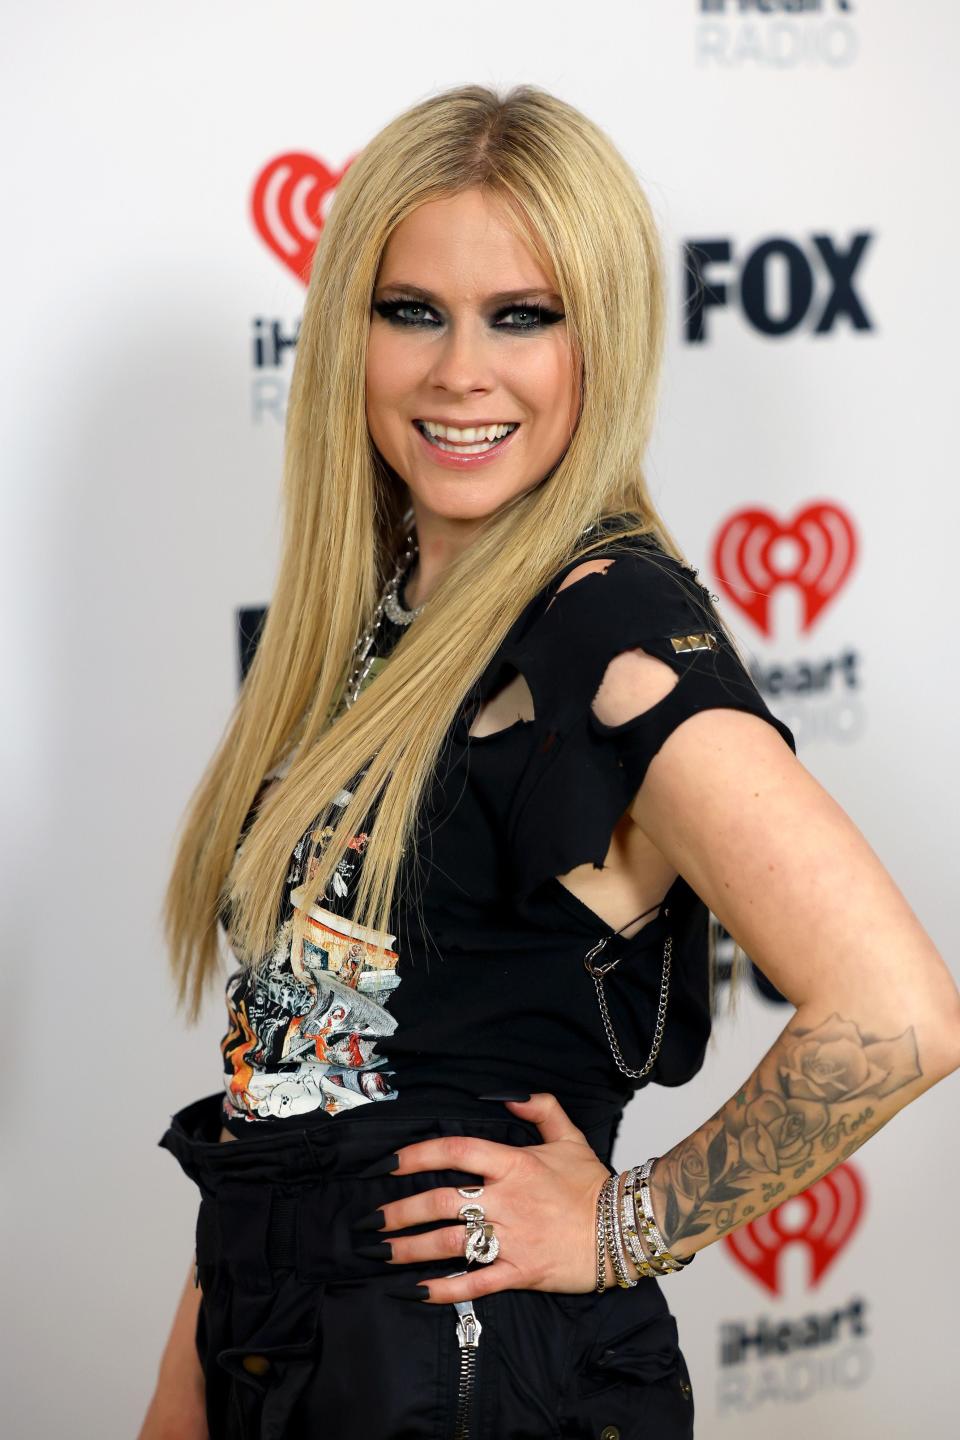 The rumors of Avril Lavigne's (pictured) death have been greatly exaggerated – but that doesn't mean people will ever stop talking about them.